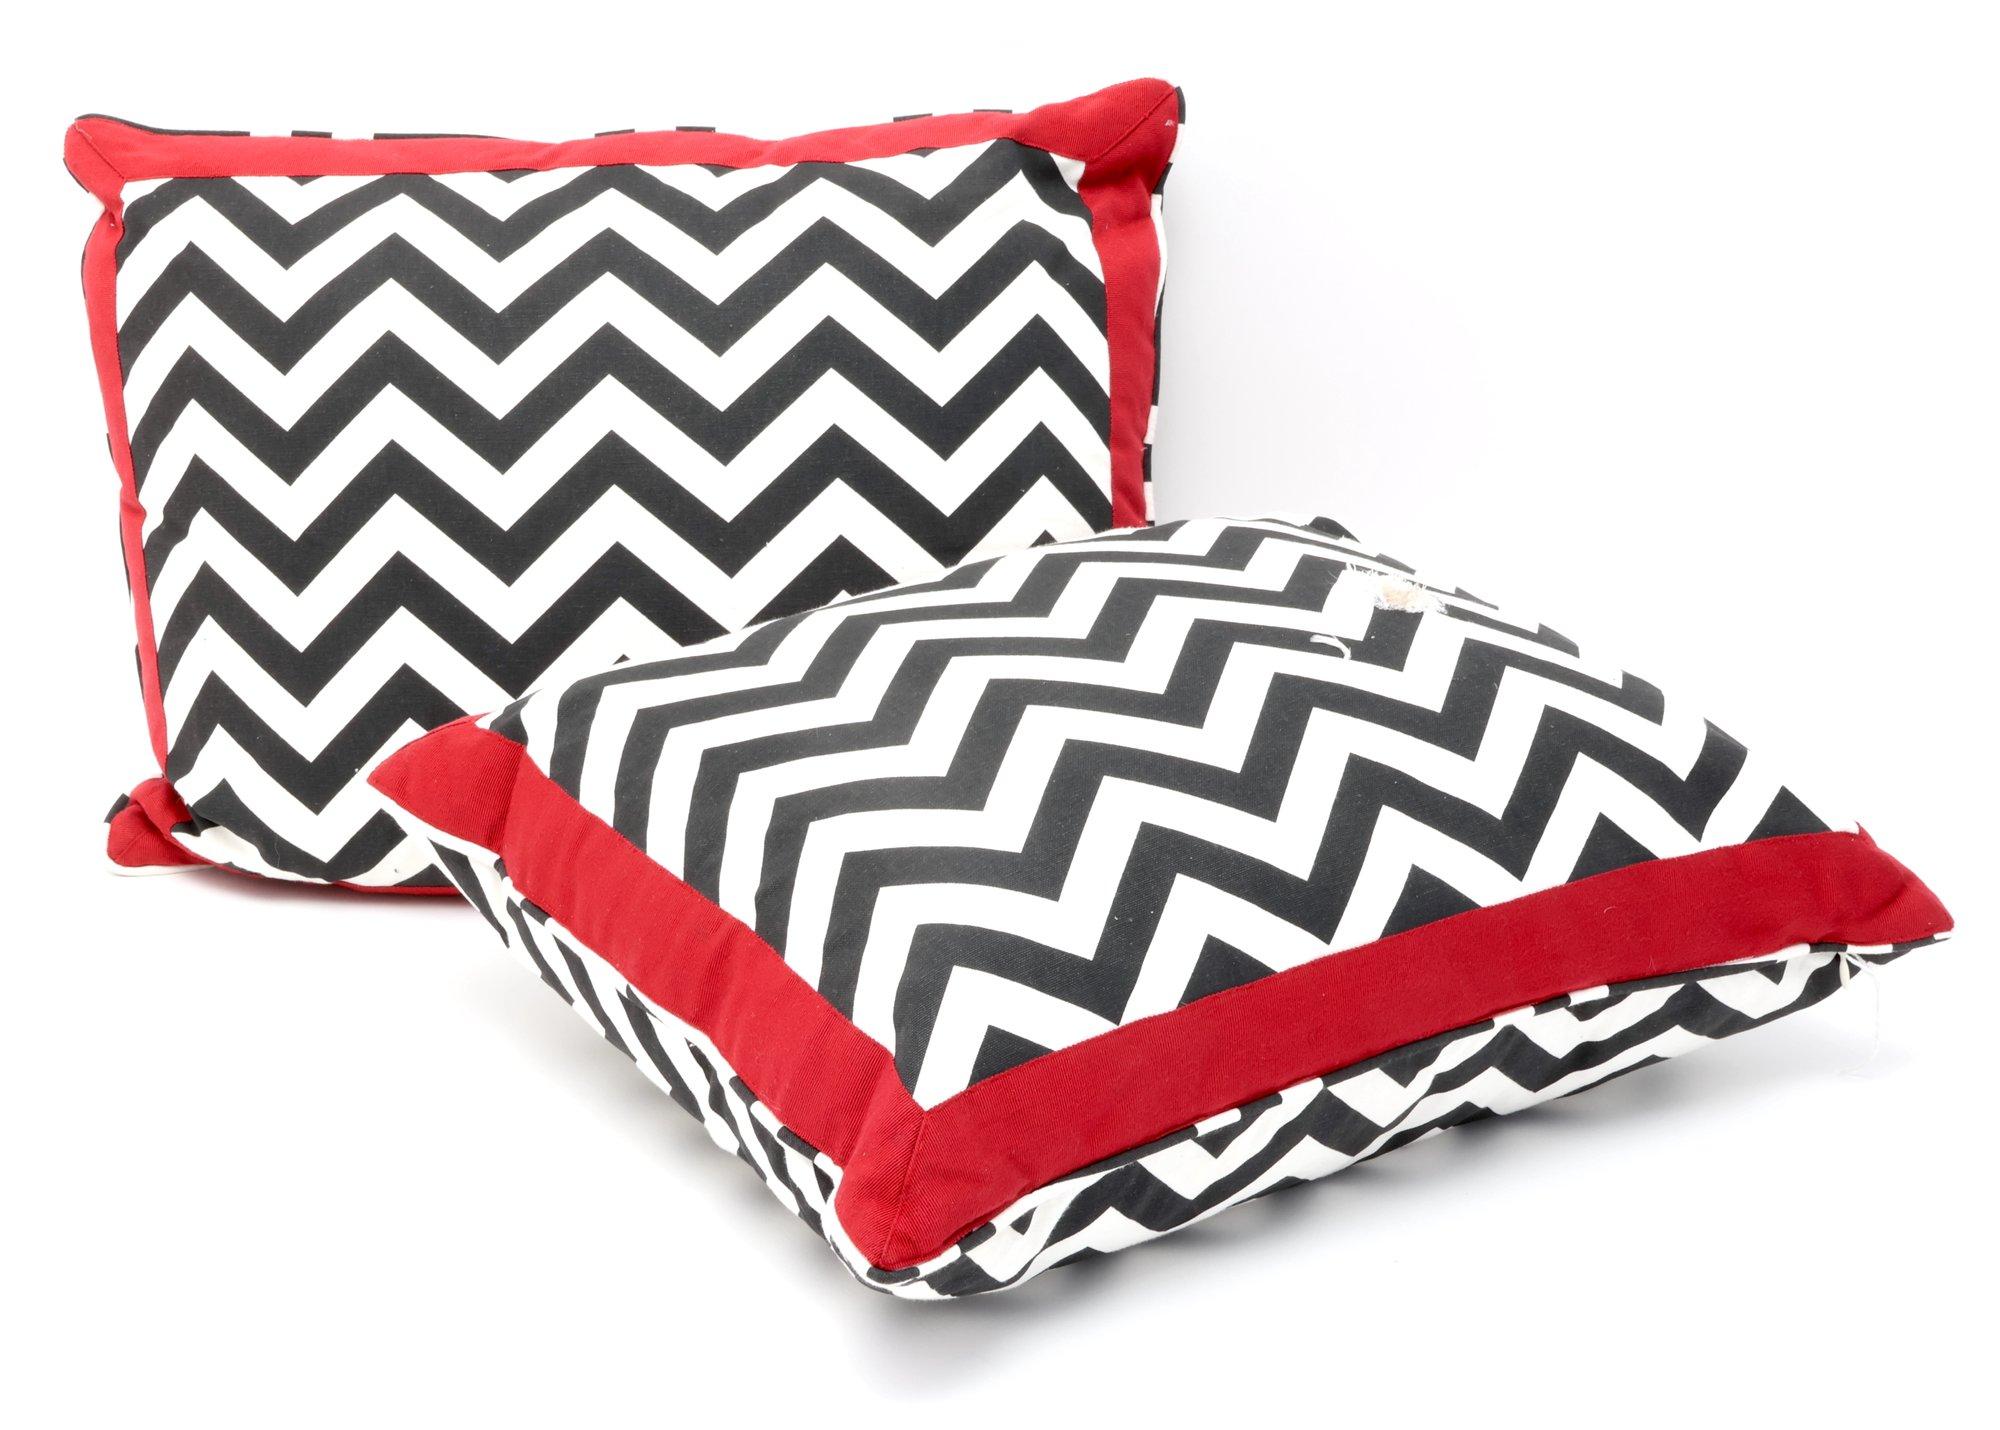 Pair Of Blackwhite And Red Pillows